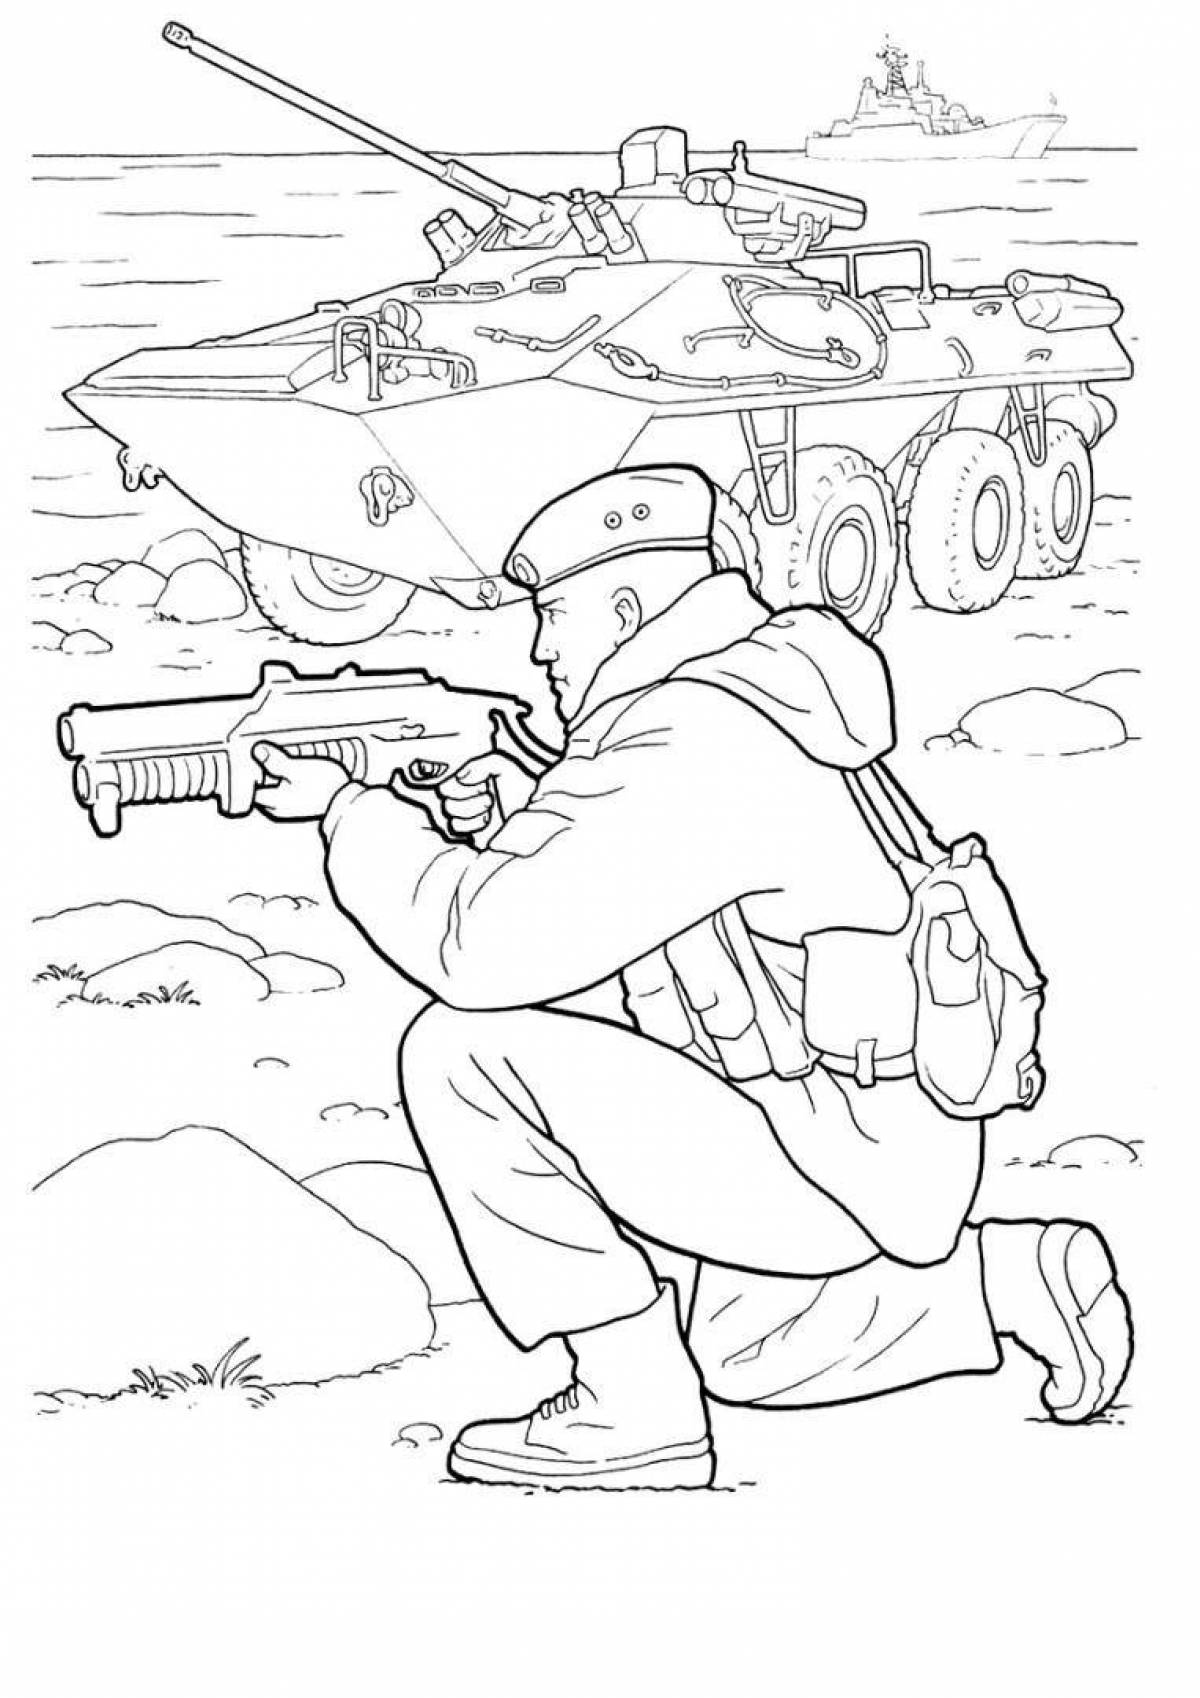 Heroic coloring pages soldiers for kids